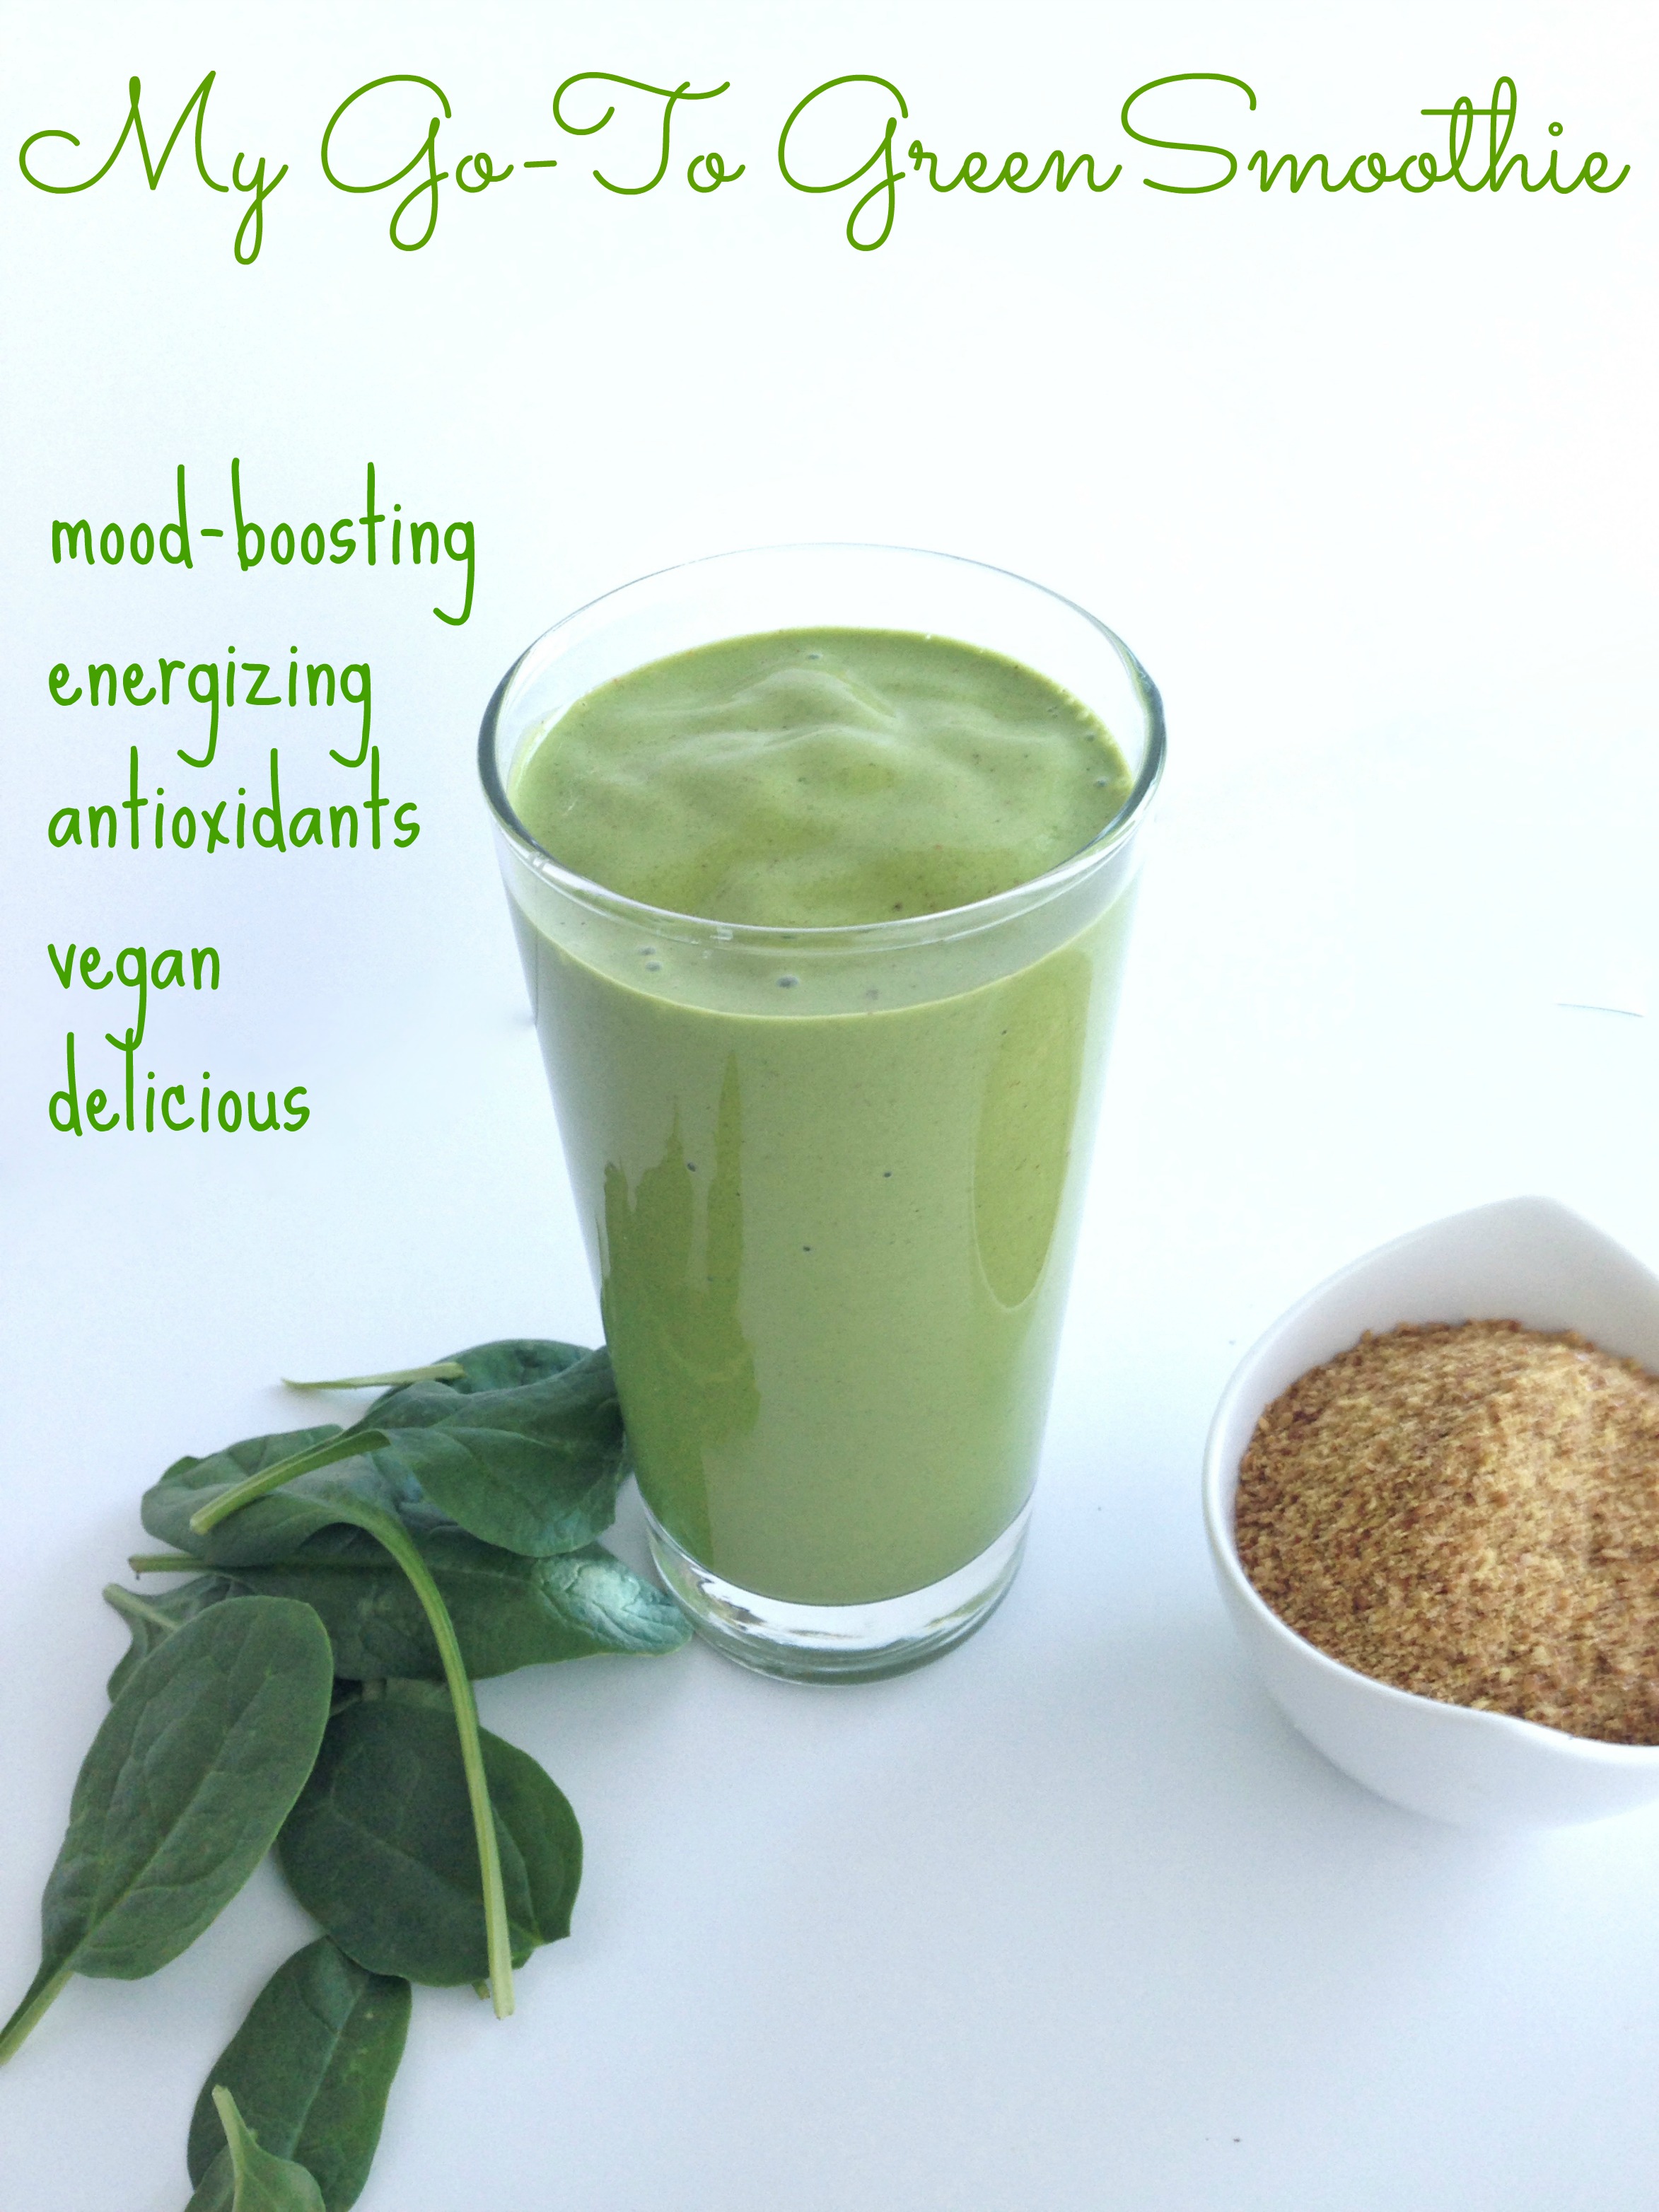 energizing mood-boosting green smoothie with maca flaxseed spinach banana and peanut butter